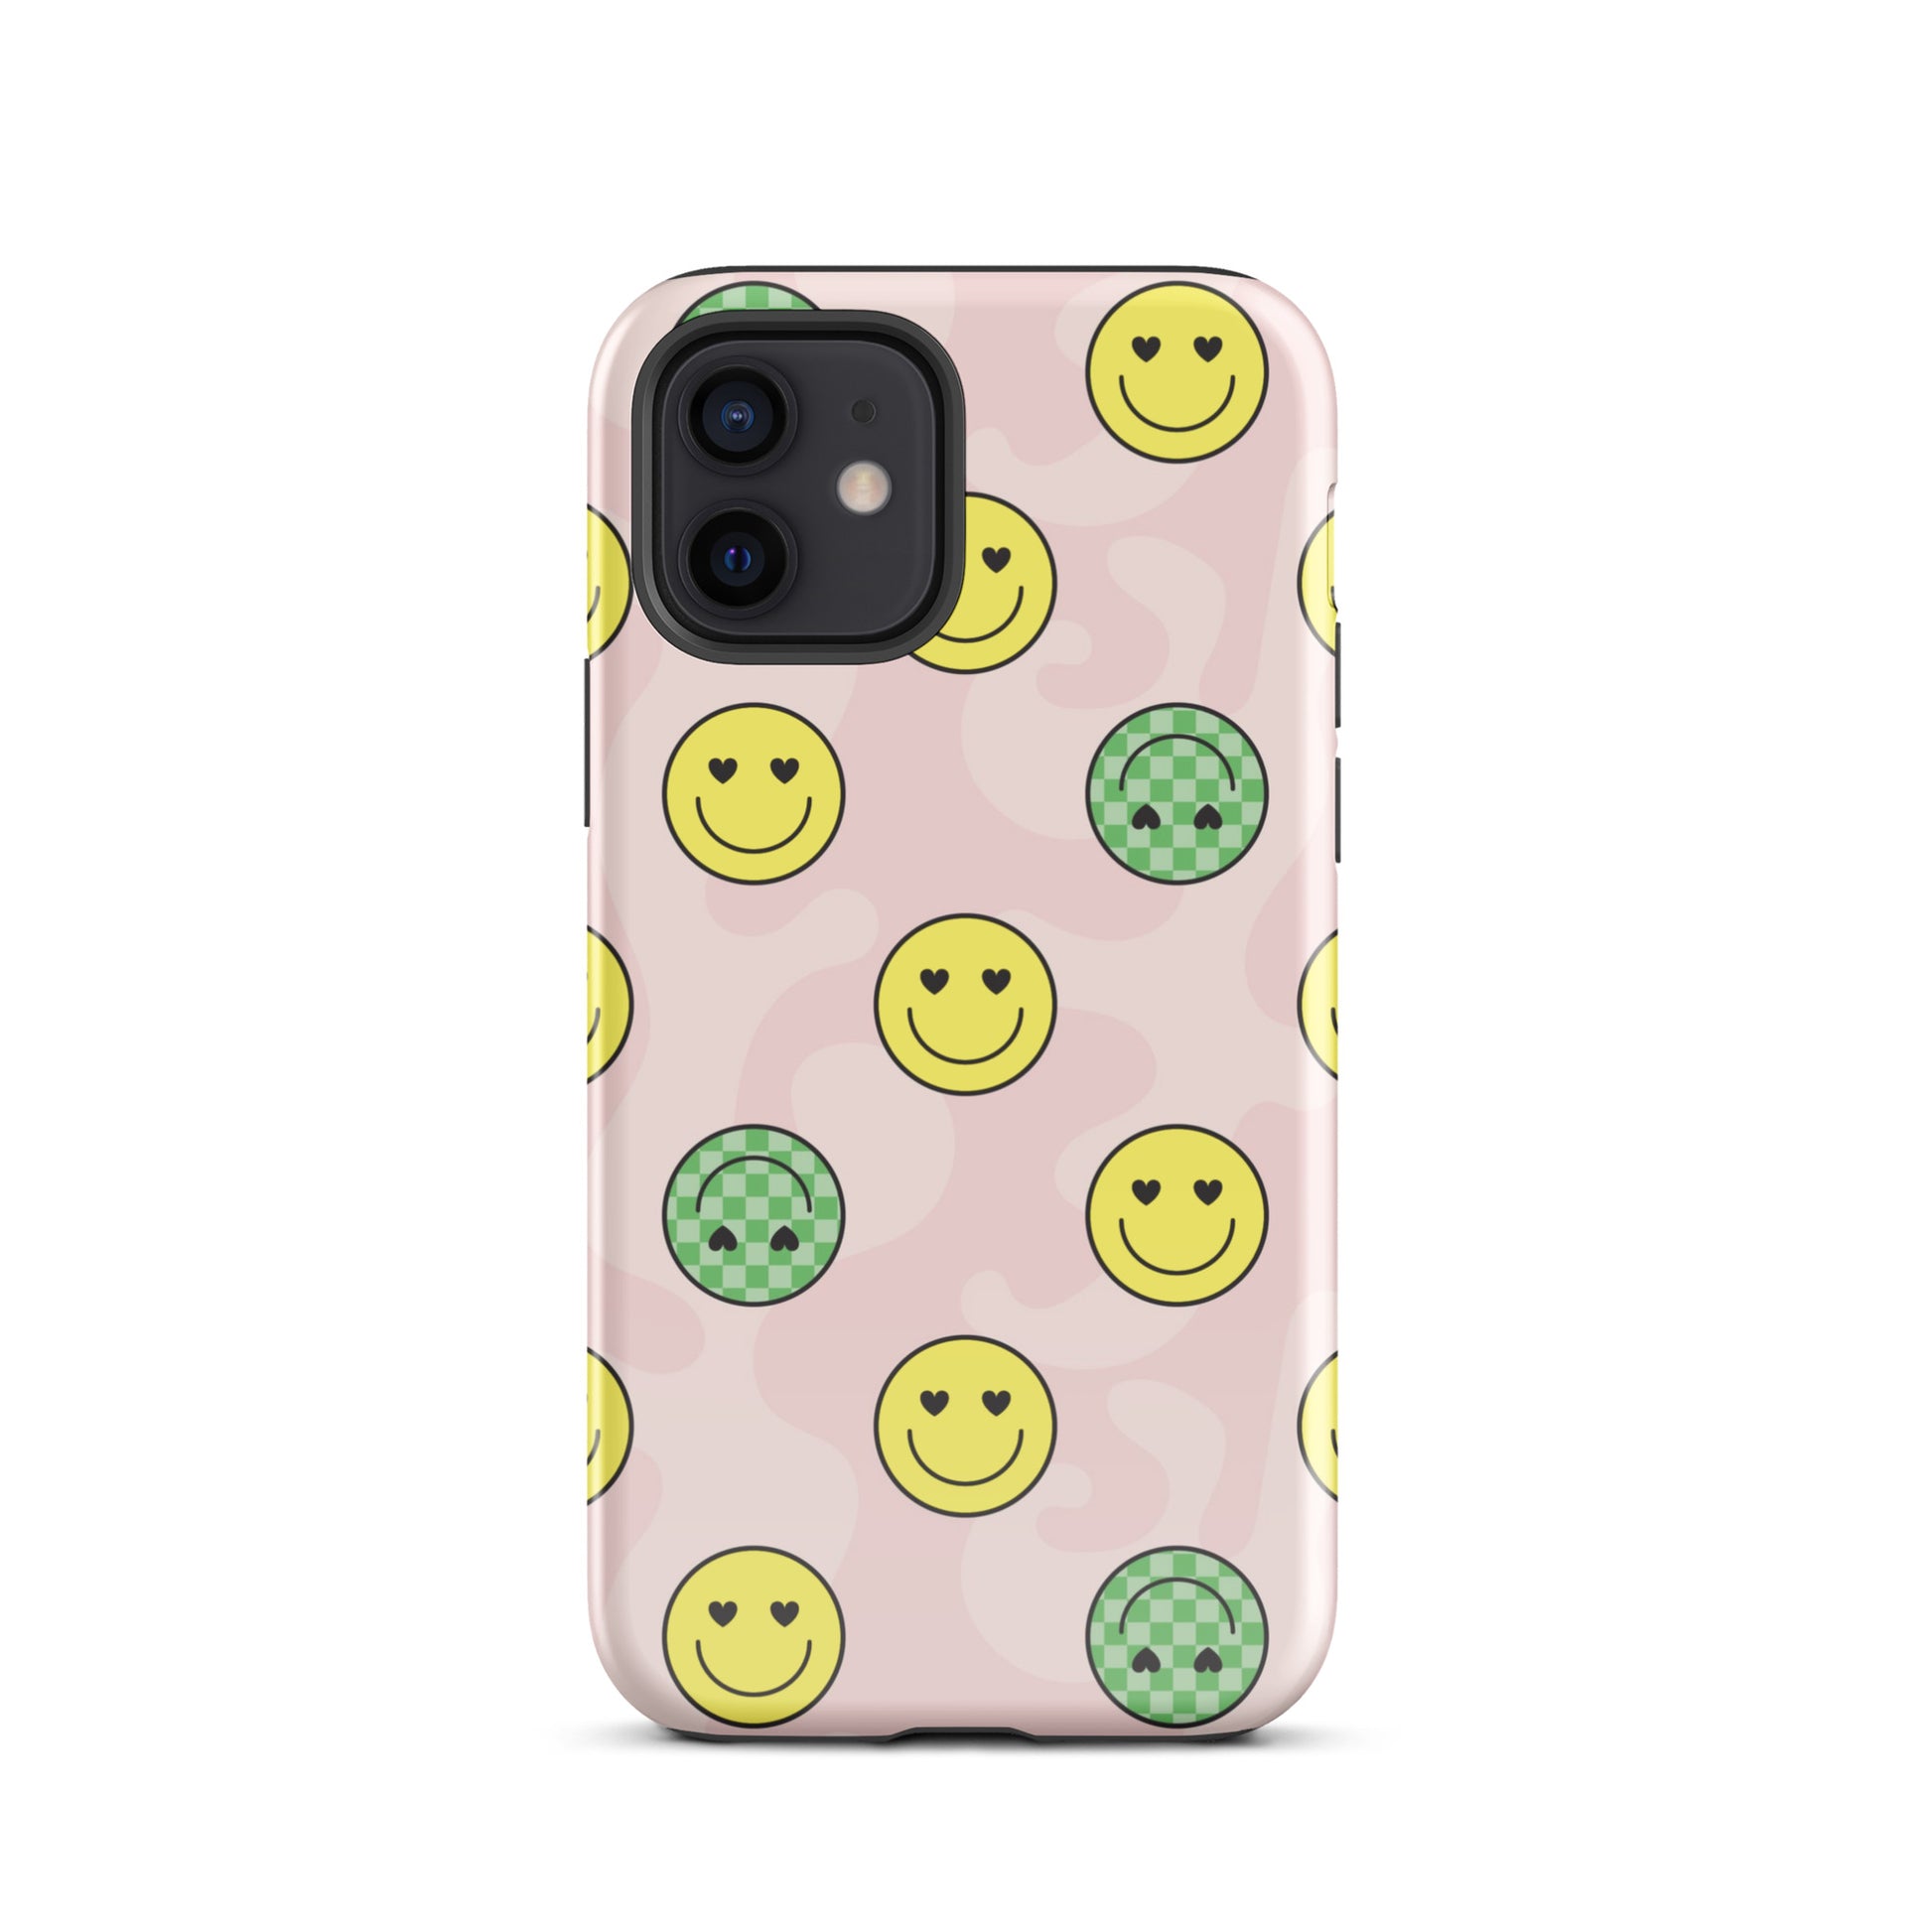 Preppy Smiley Faces iPhone Case iPhone 12 Glossy